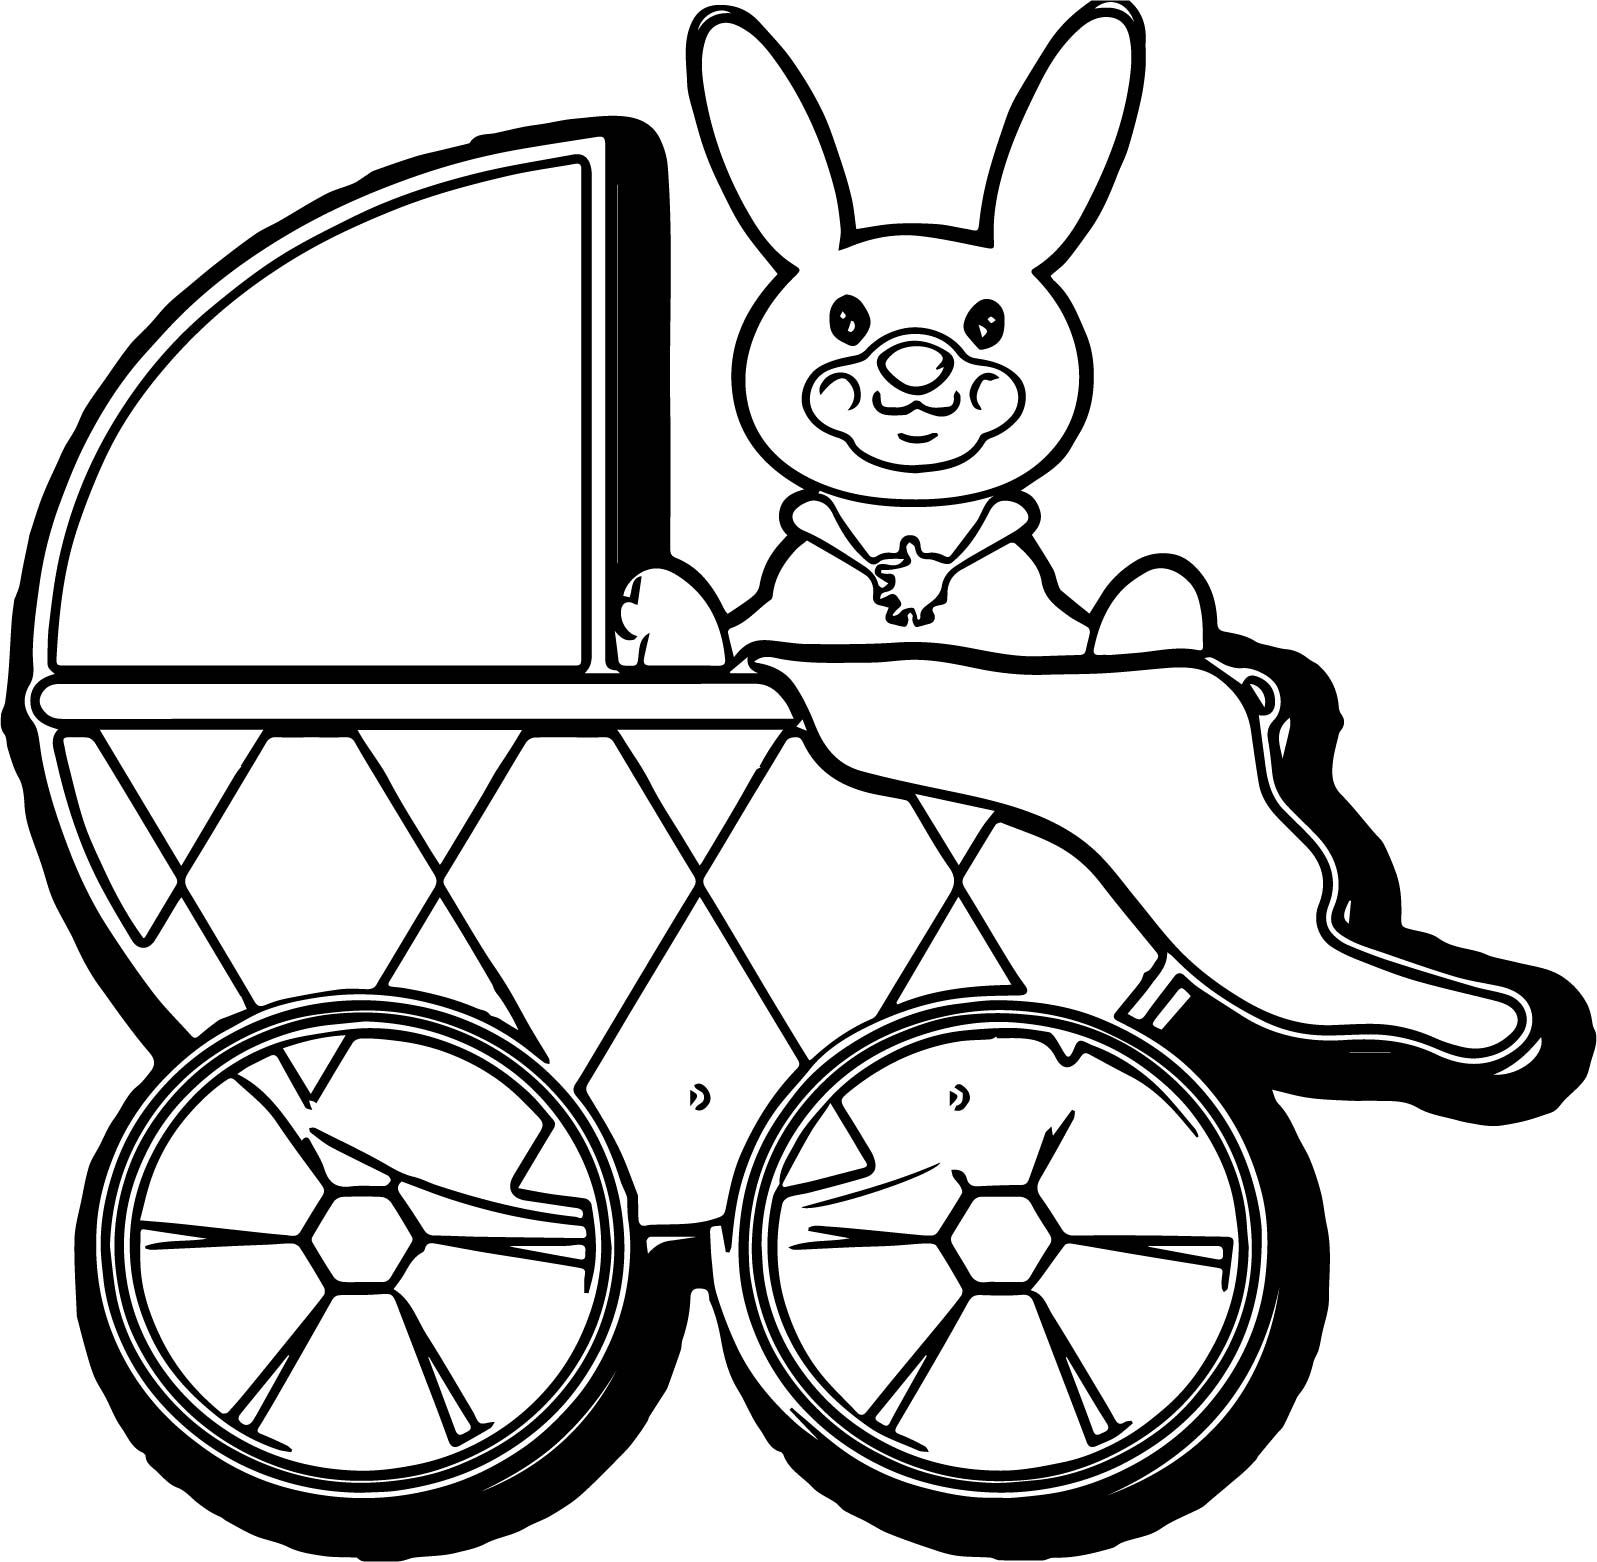 awesome Baby Boy Stroller Free Art Images Coloring Page | Coloring pages  for boys, Boy coloring, Boy stroller